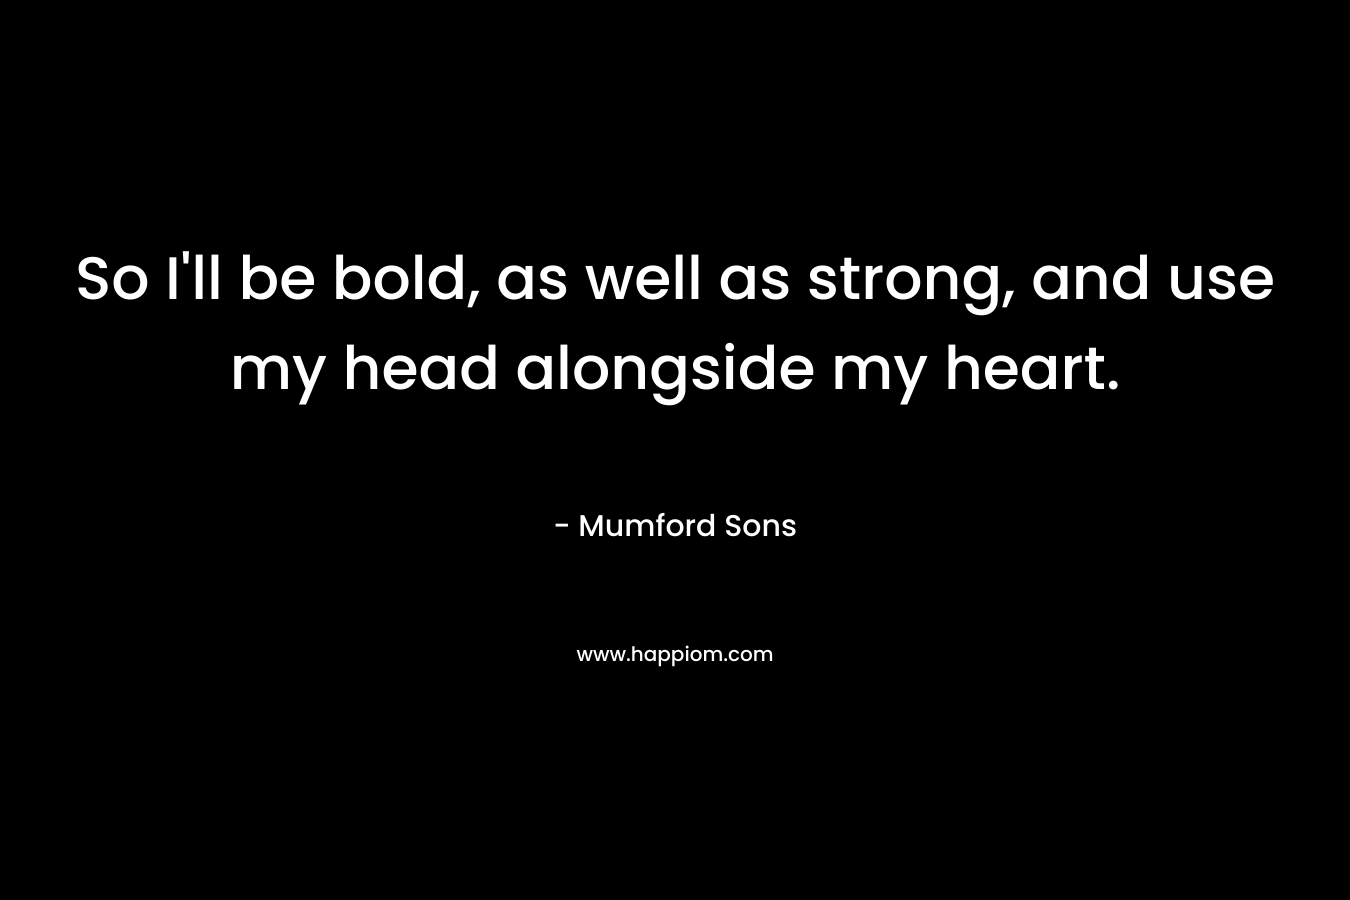 So I'll be bold, as well as strong, and use my head alongside my heart.